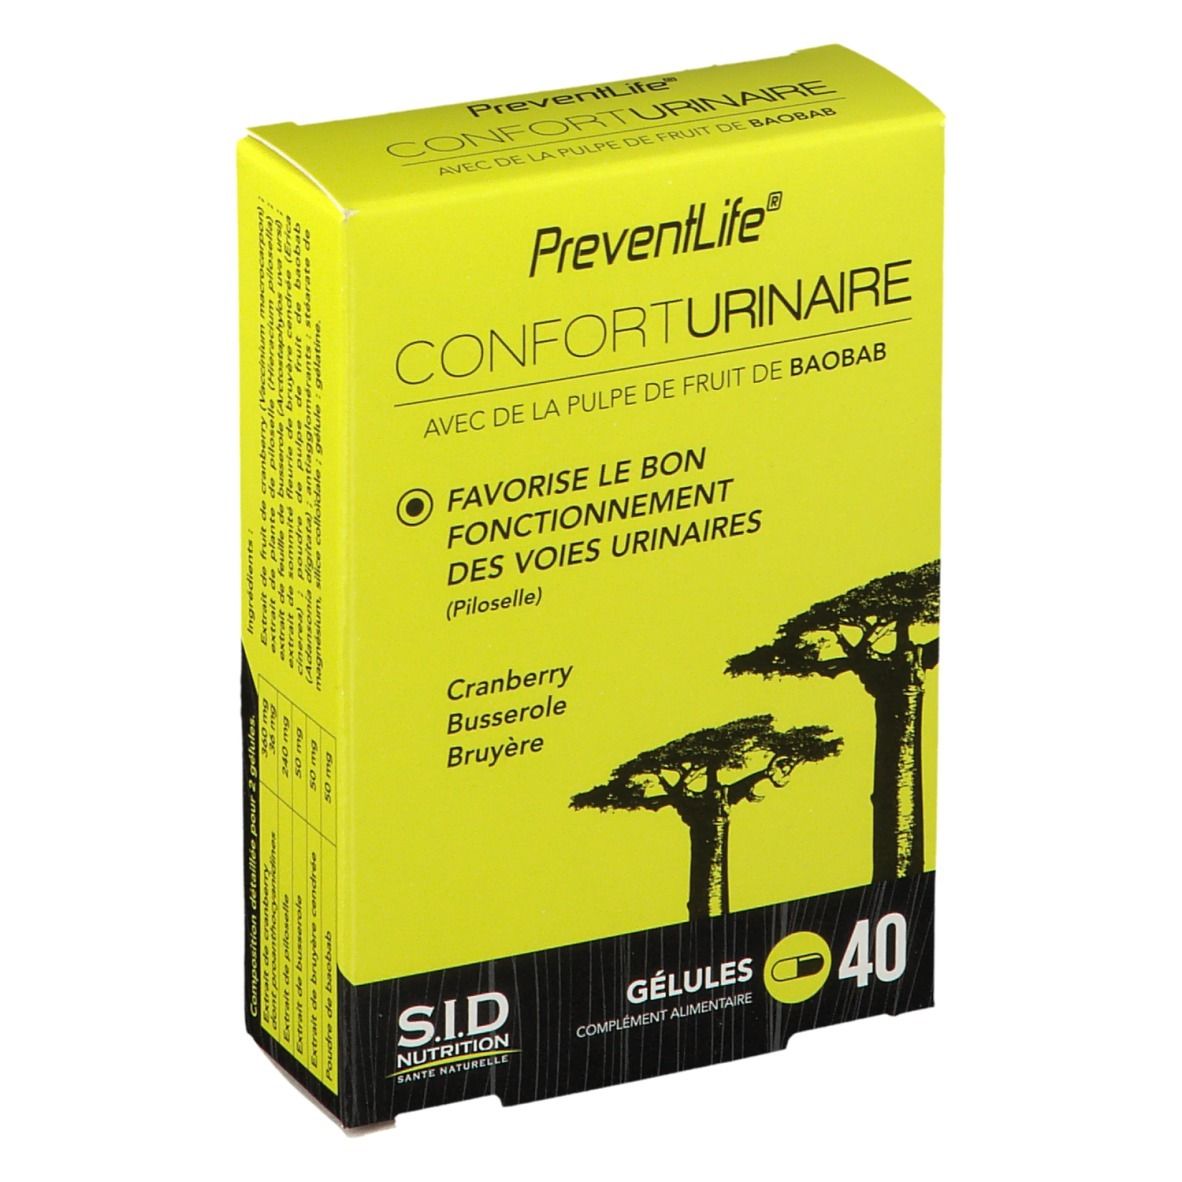 SID Nutrition Preventlife® Confort urinaire